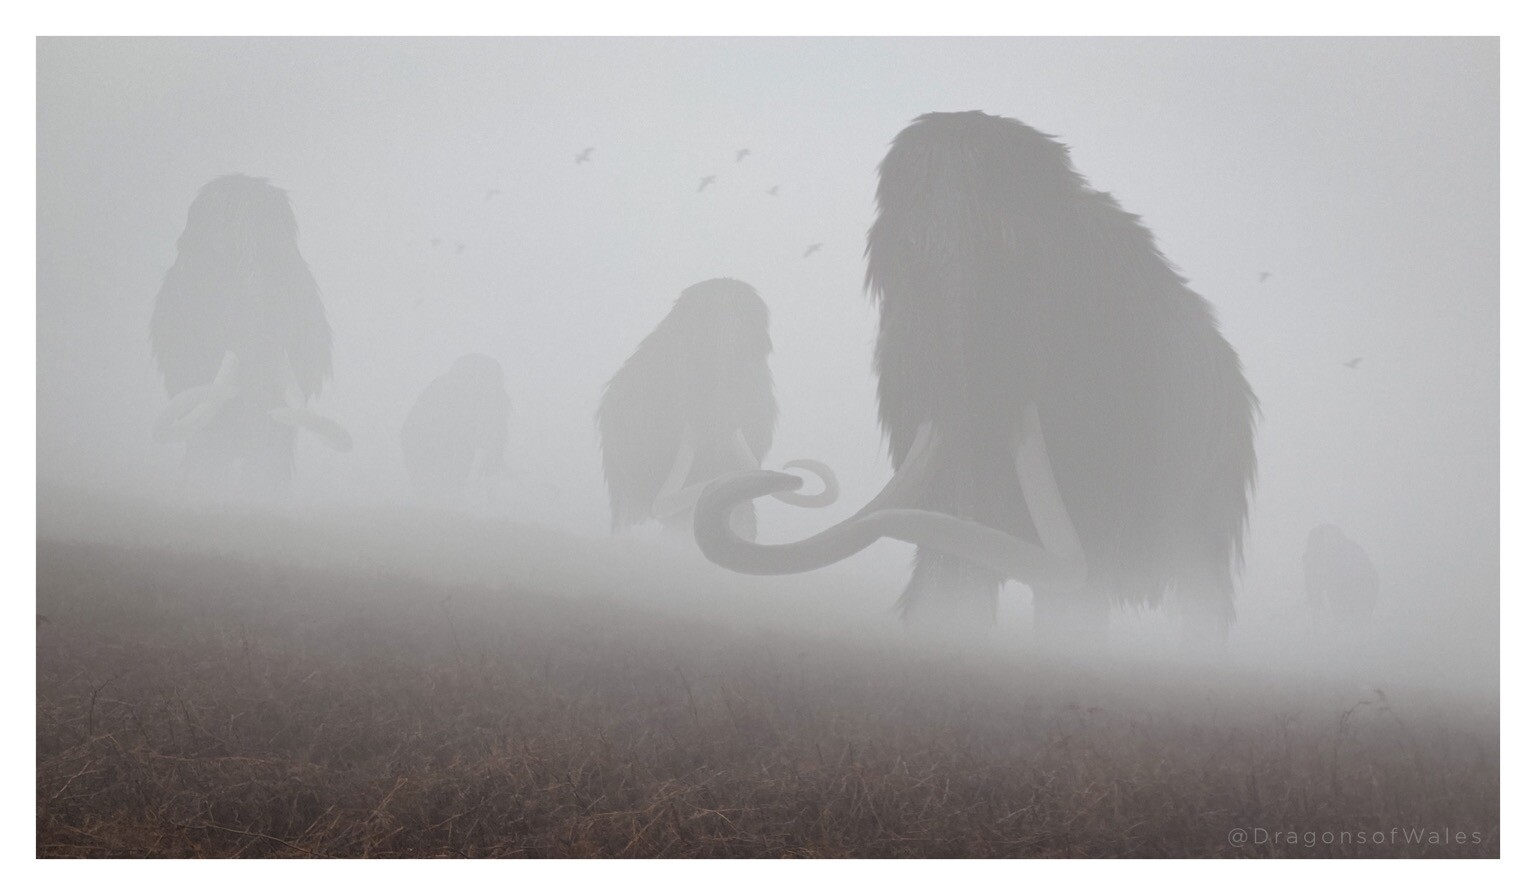 A herd of woolly mammoths, emerging from thick fog. 